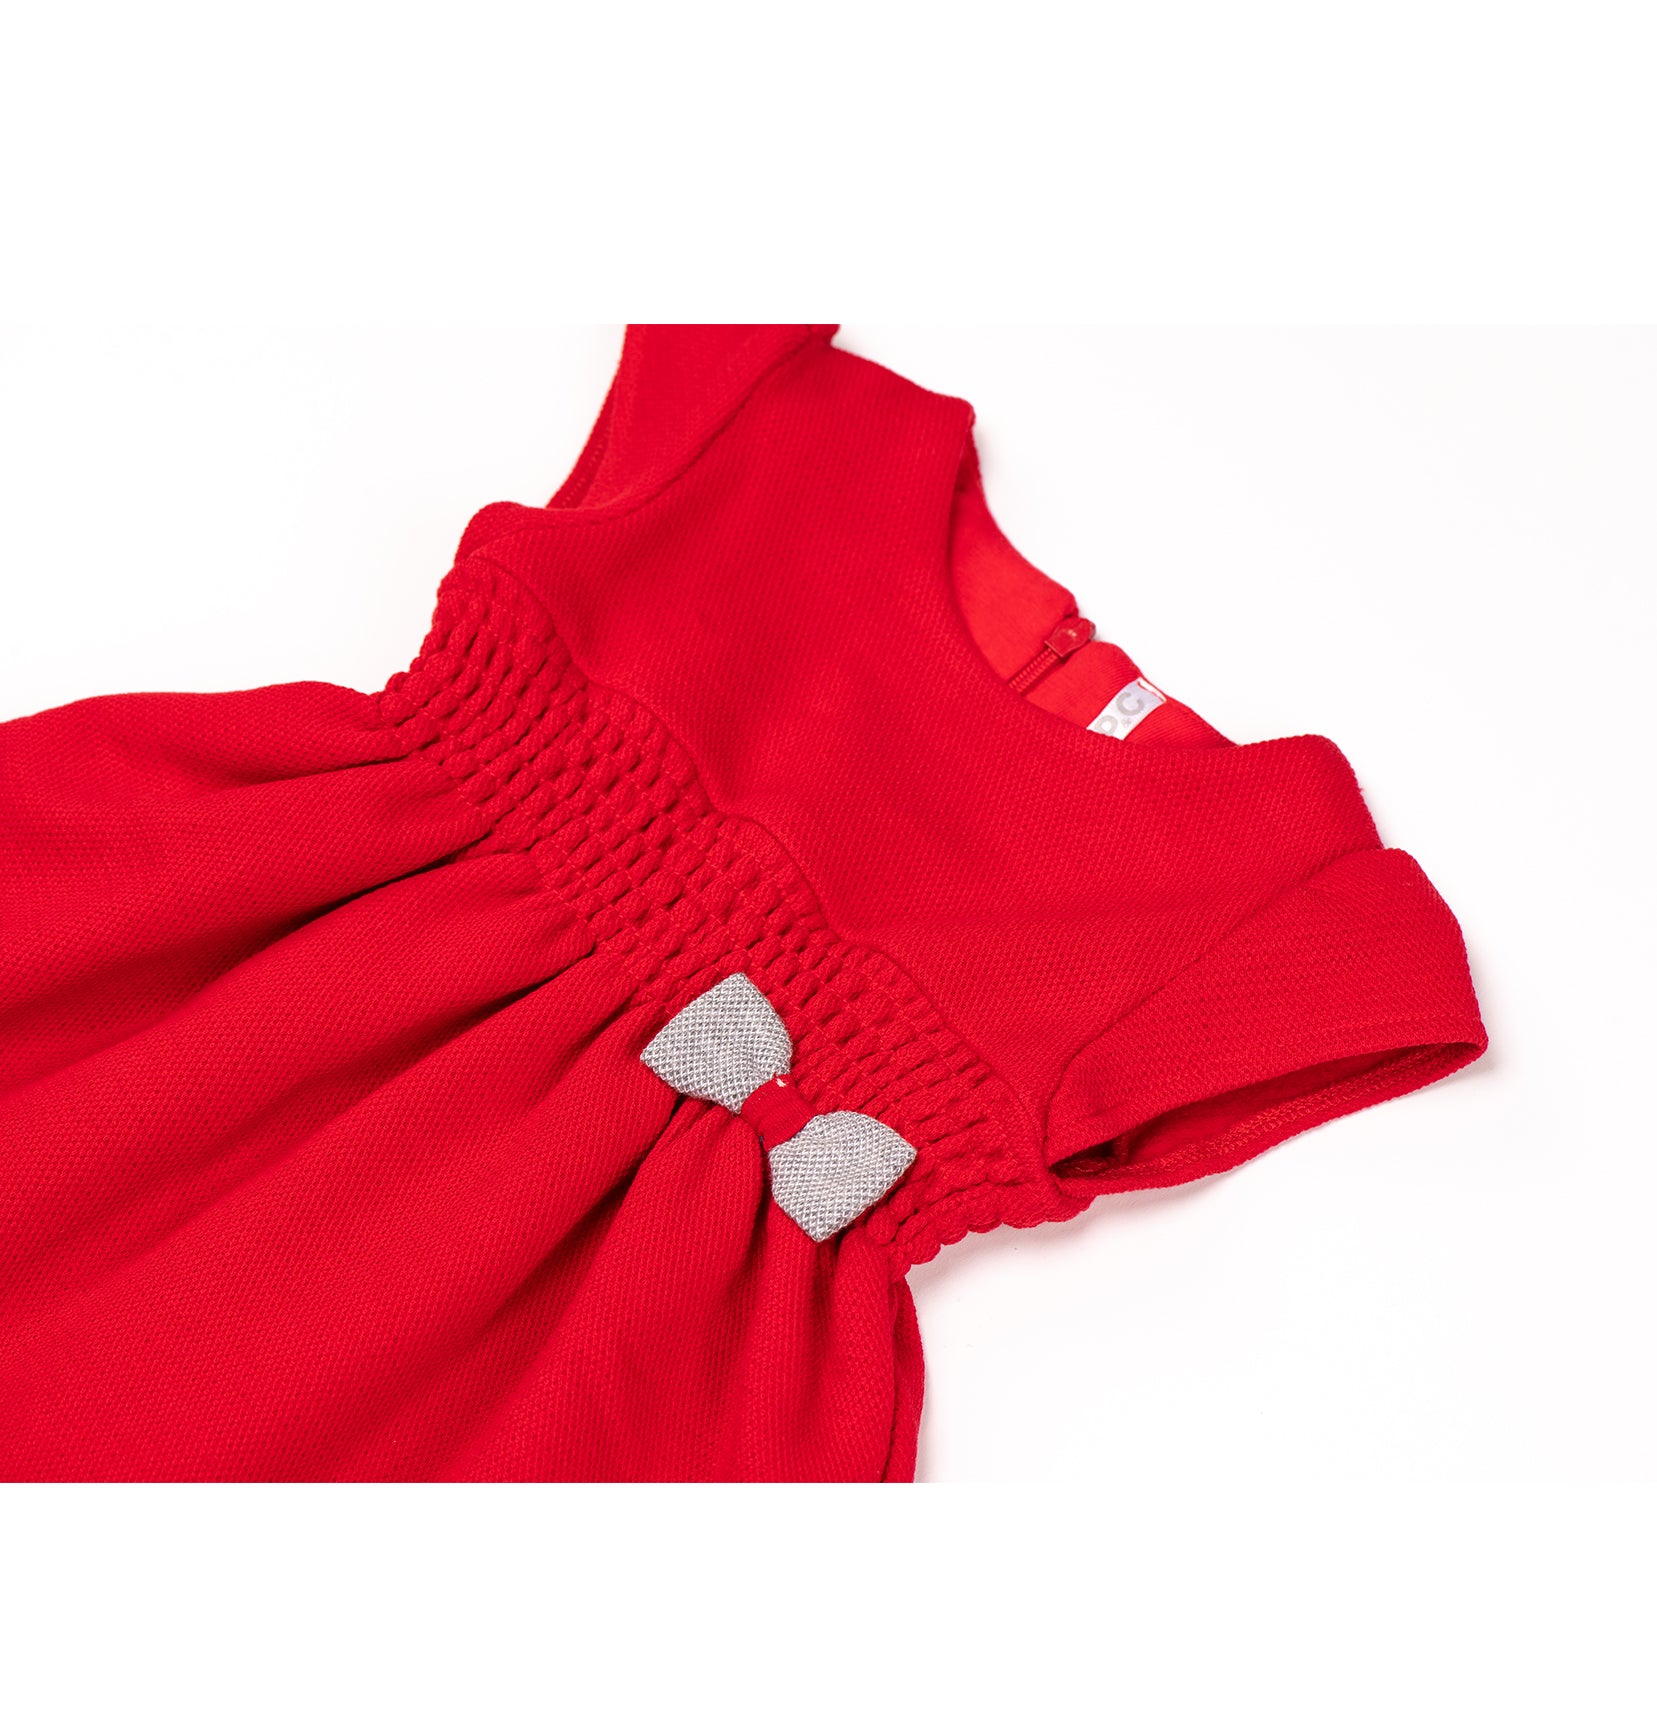 Modish red baby girl dress by Pompelo